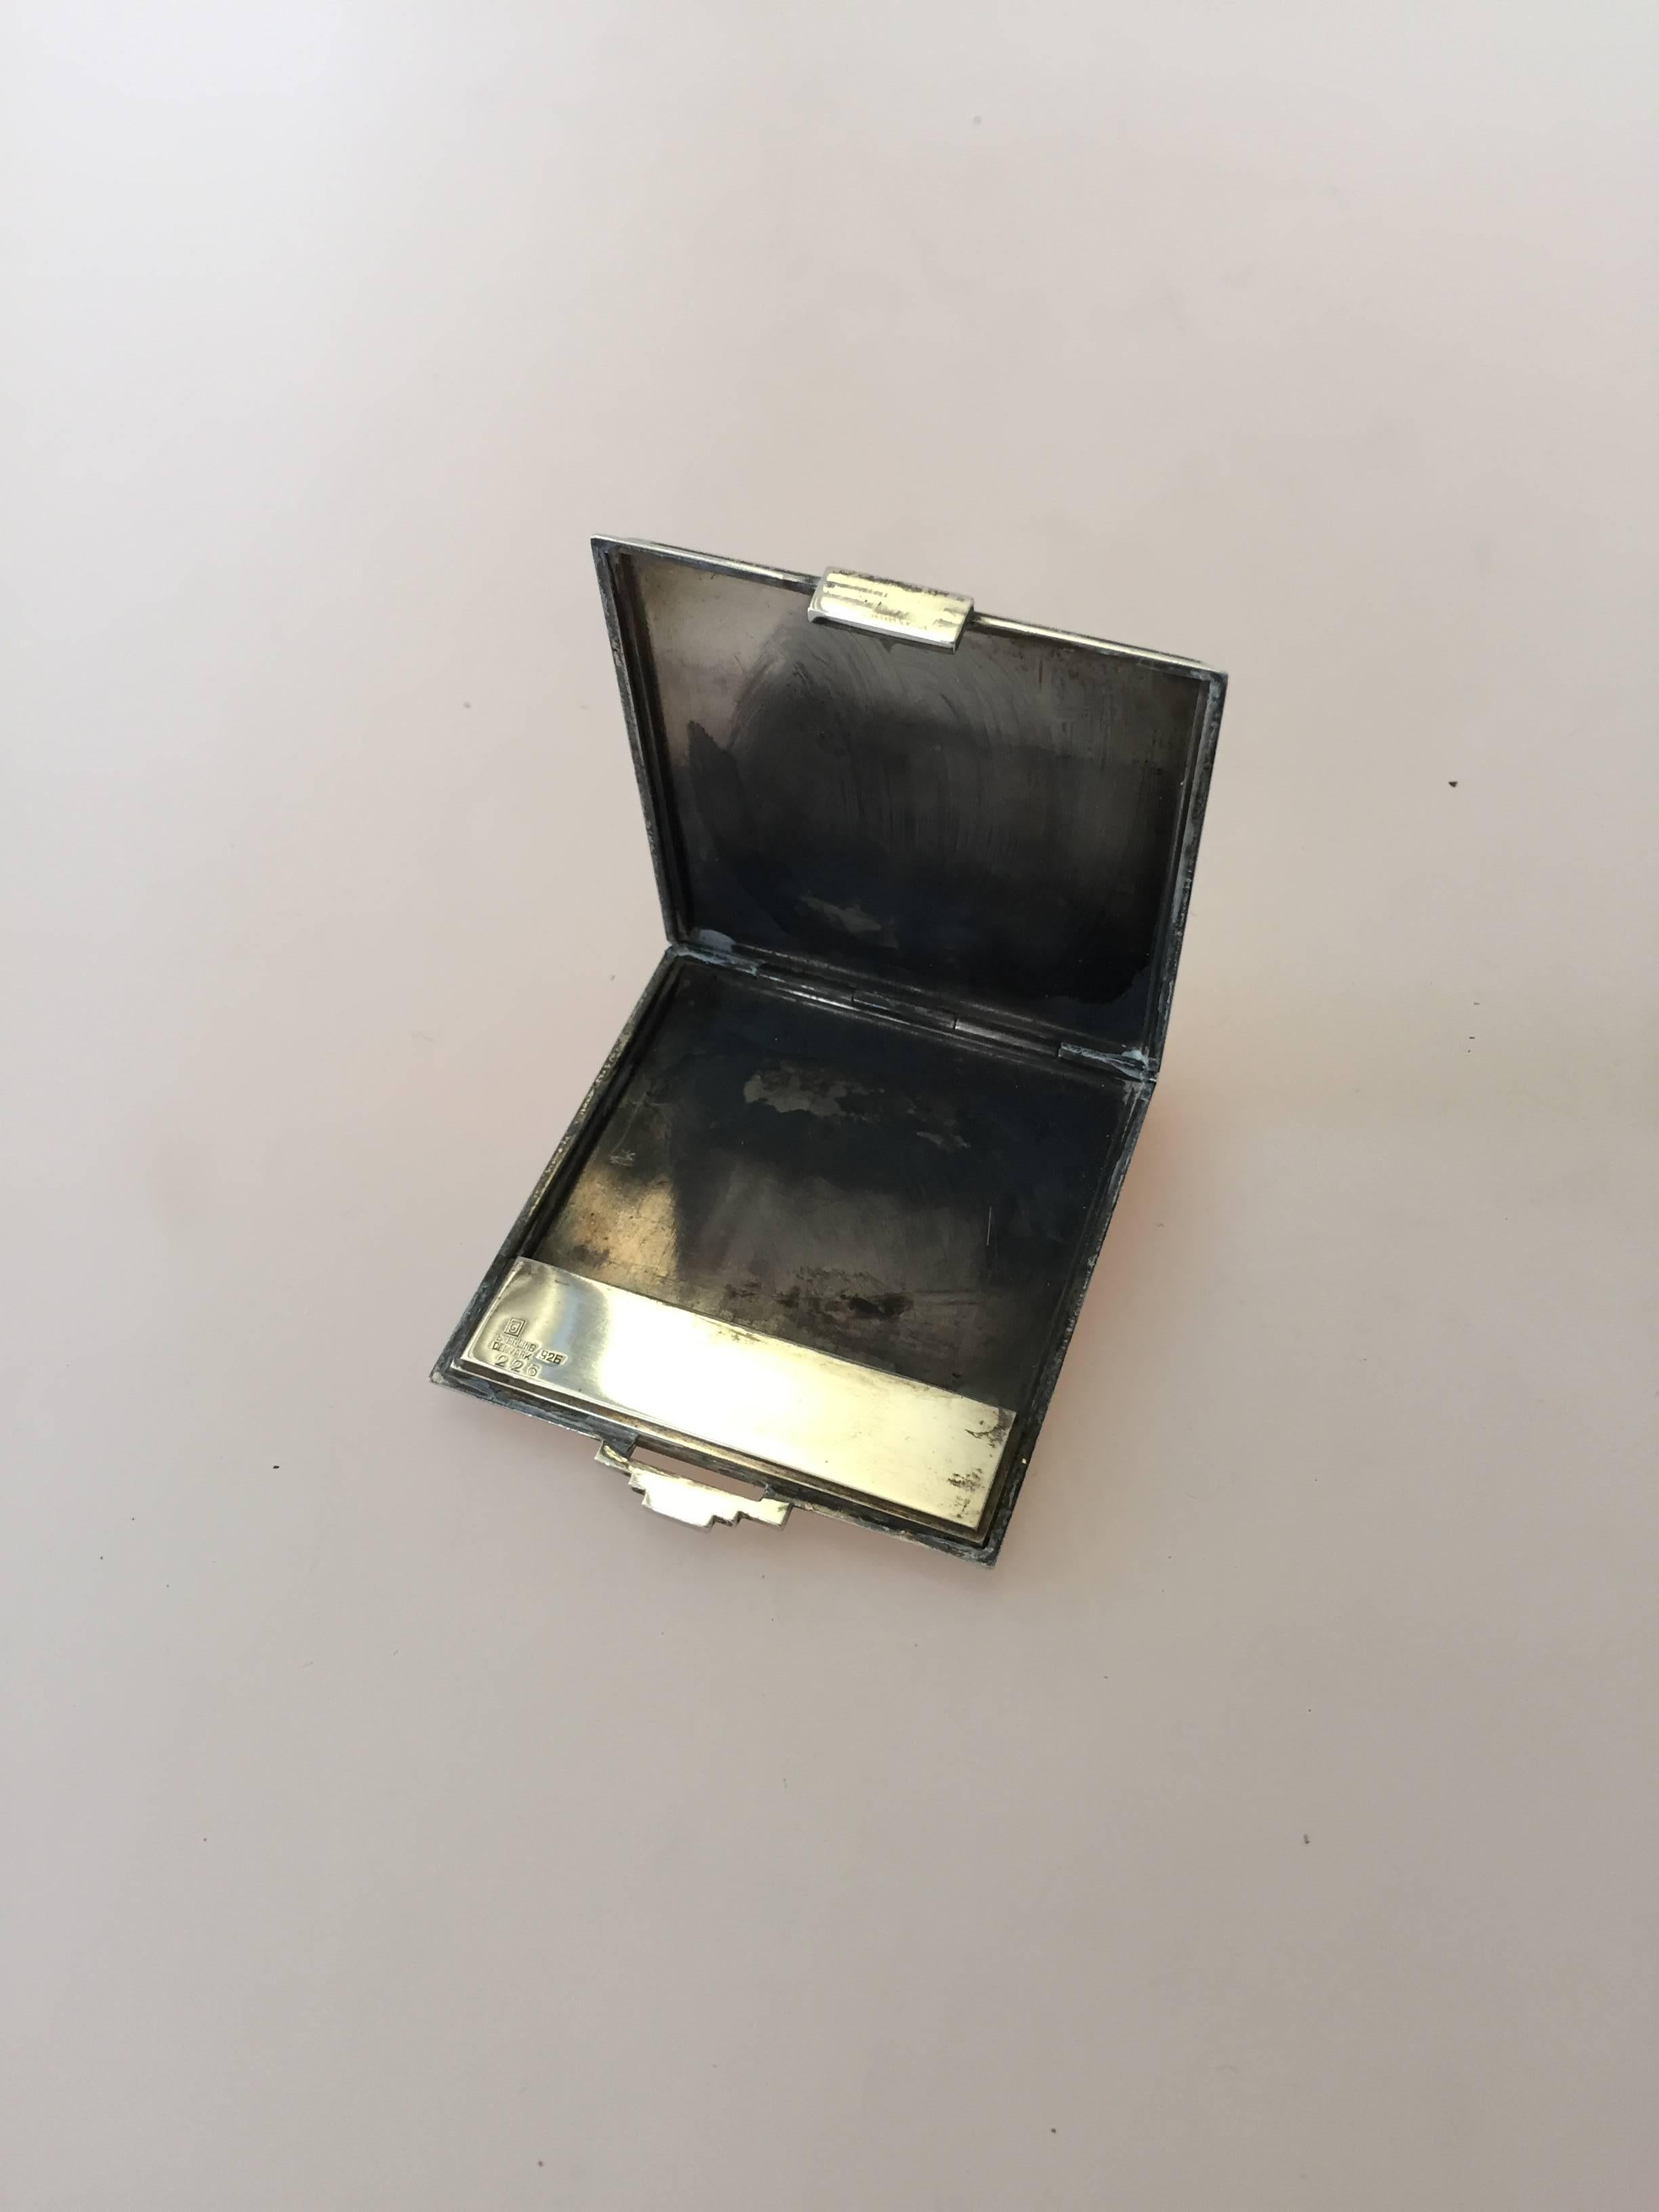 Georg Jensen sterling silver matchstick holder. The case is from 1933-1944 and can also be used as an elegant card holder. It is in good condition and measures 5.7 cm x 6.5 cm. 

Georg Jensen (1866-1935) opened his small silver atelier in